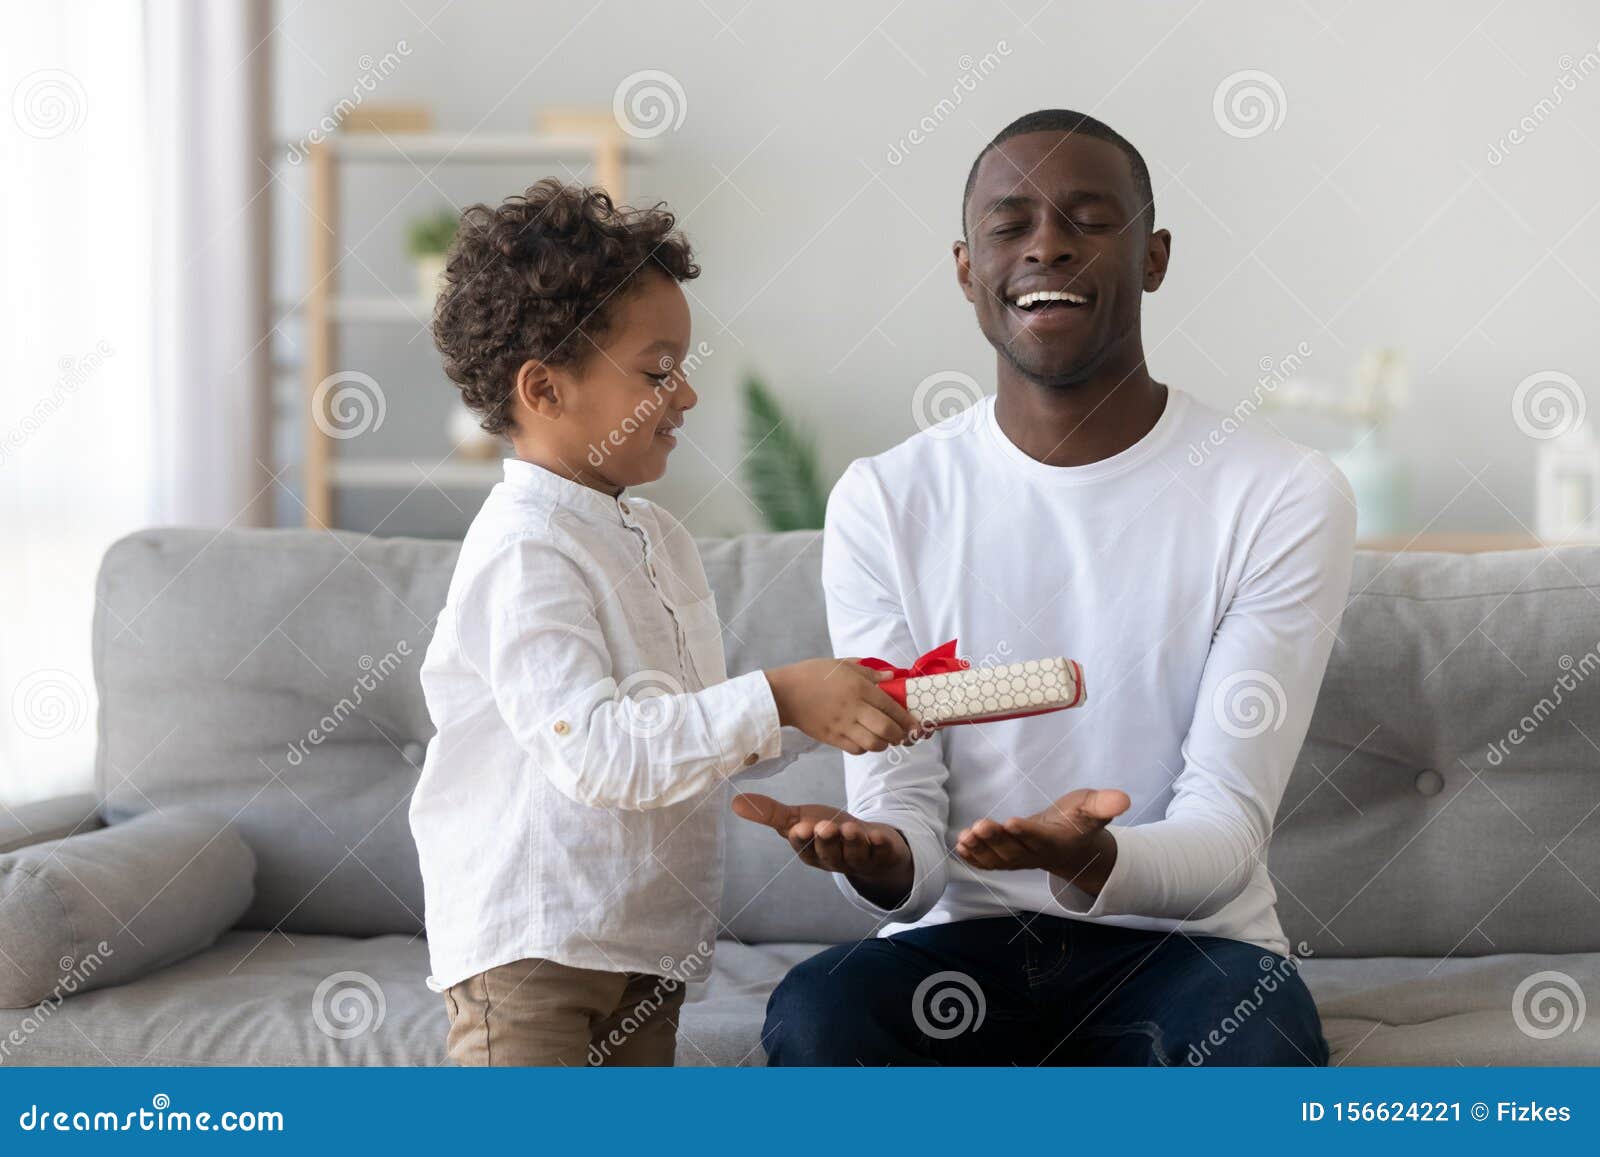 cute african kid son giving gift to dad fathers day